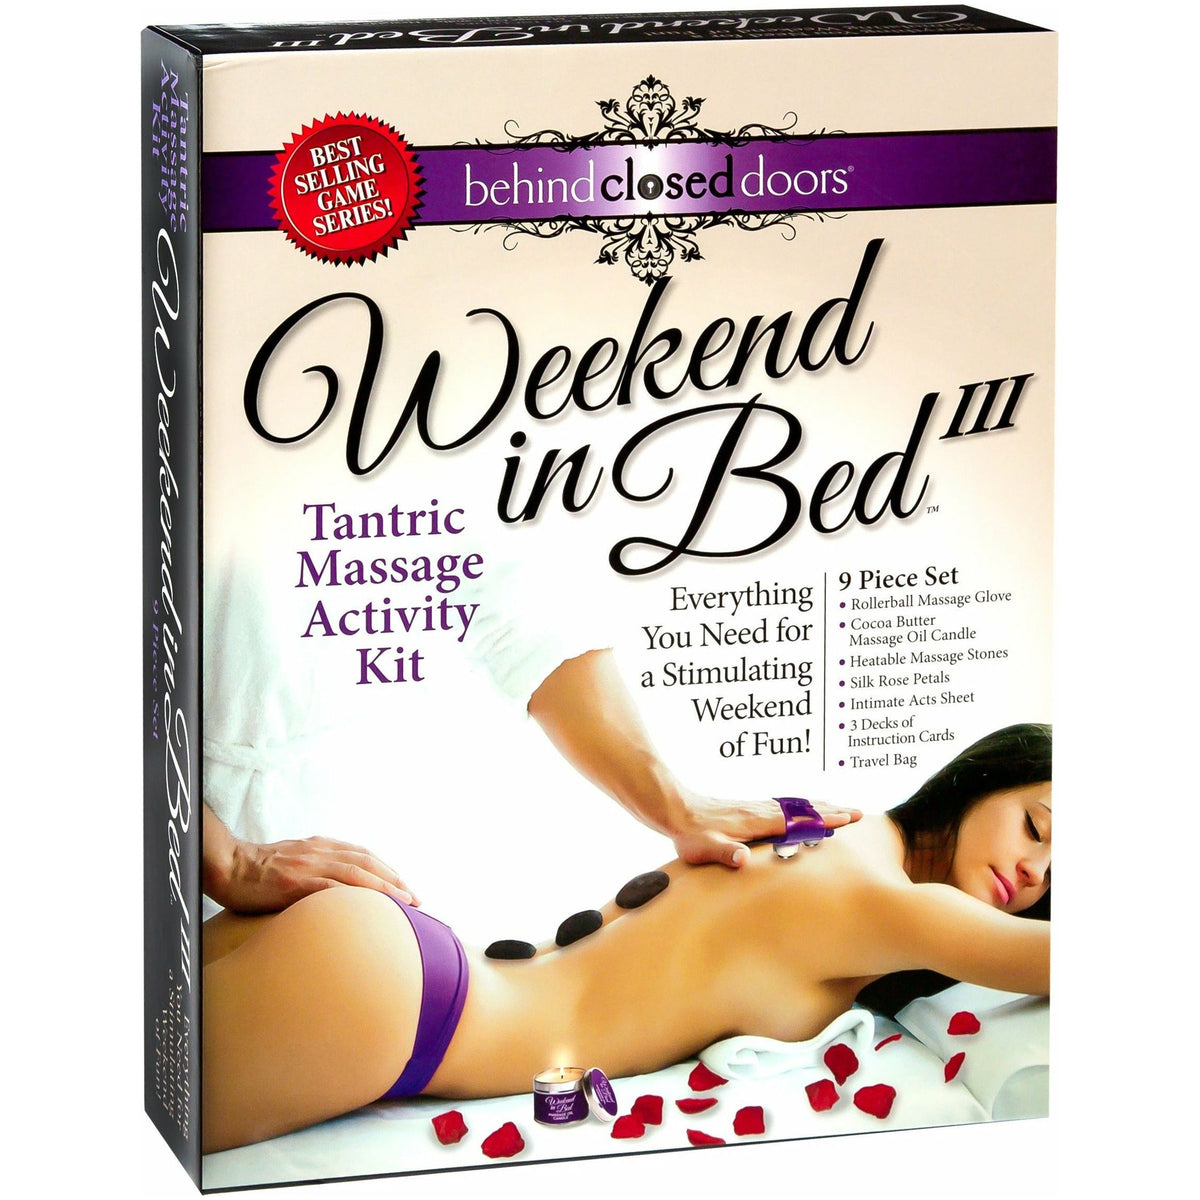 Weekend in Bed - Tantric Massage Kit for Couples